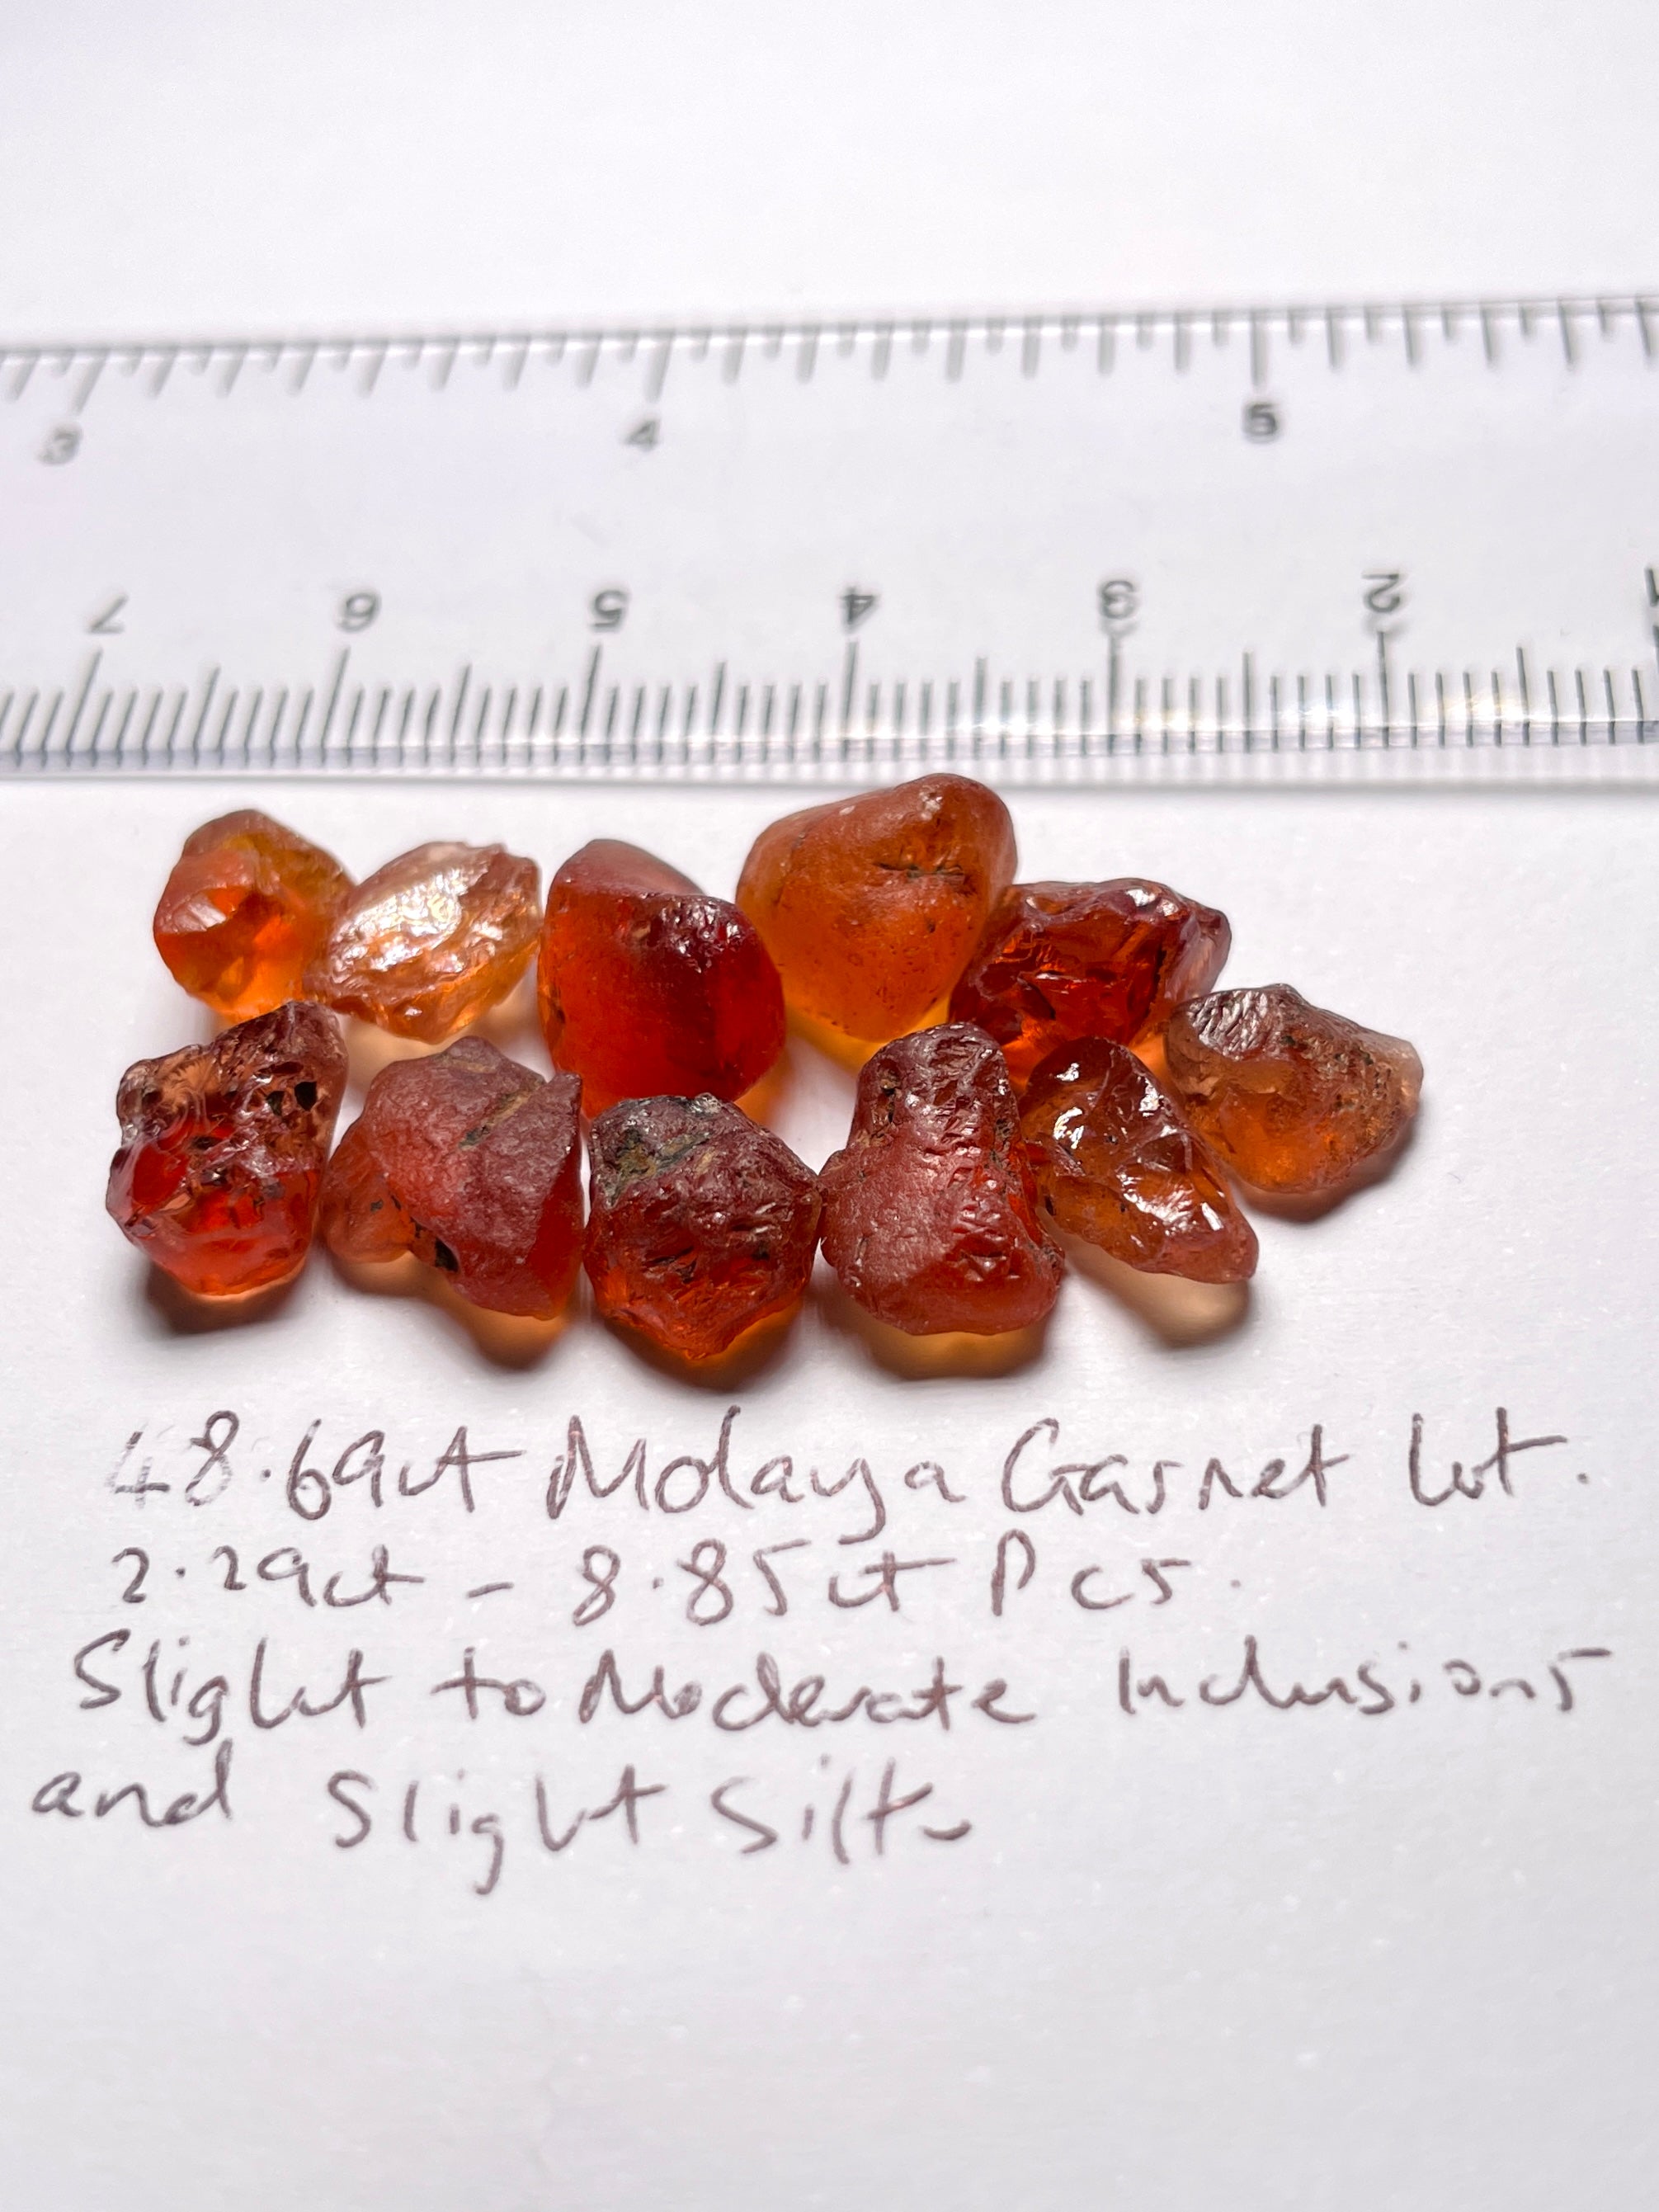 48.69Ct Malaya Garnet Lot All Have Slight To Moderate Inclusions And Silk Tanzania Untreated